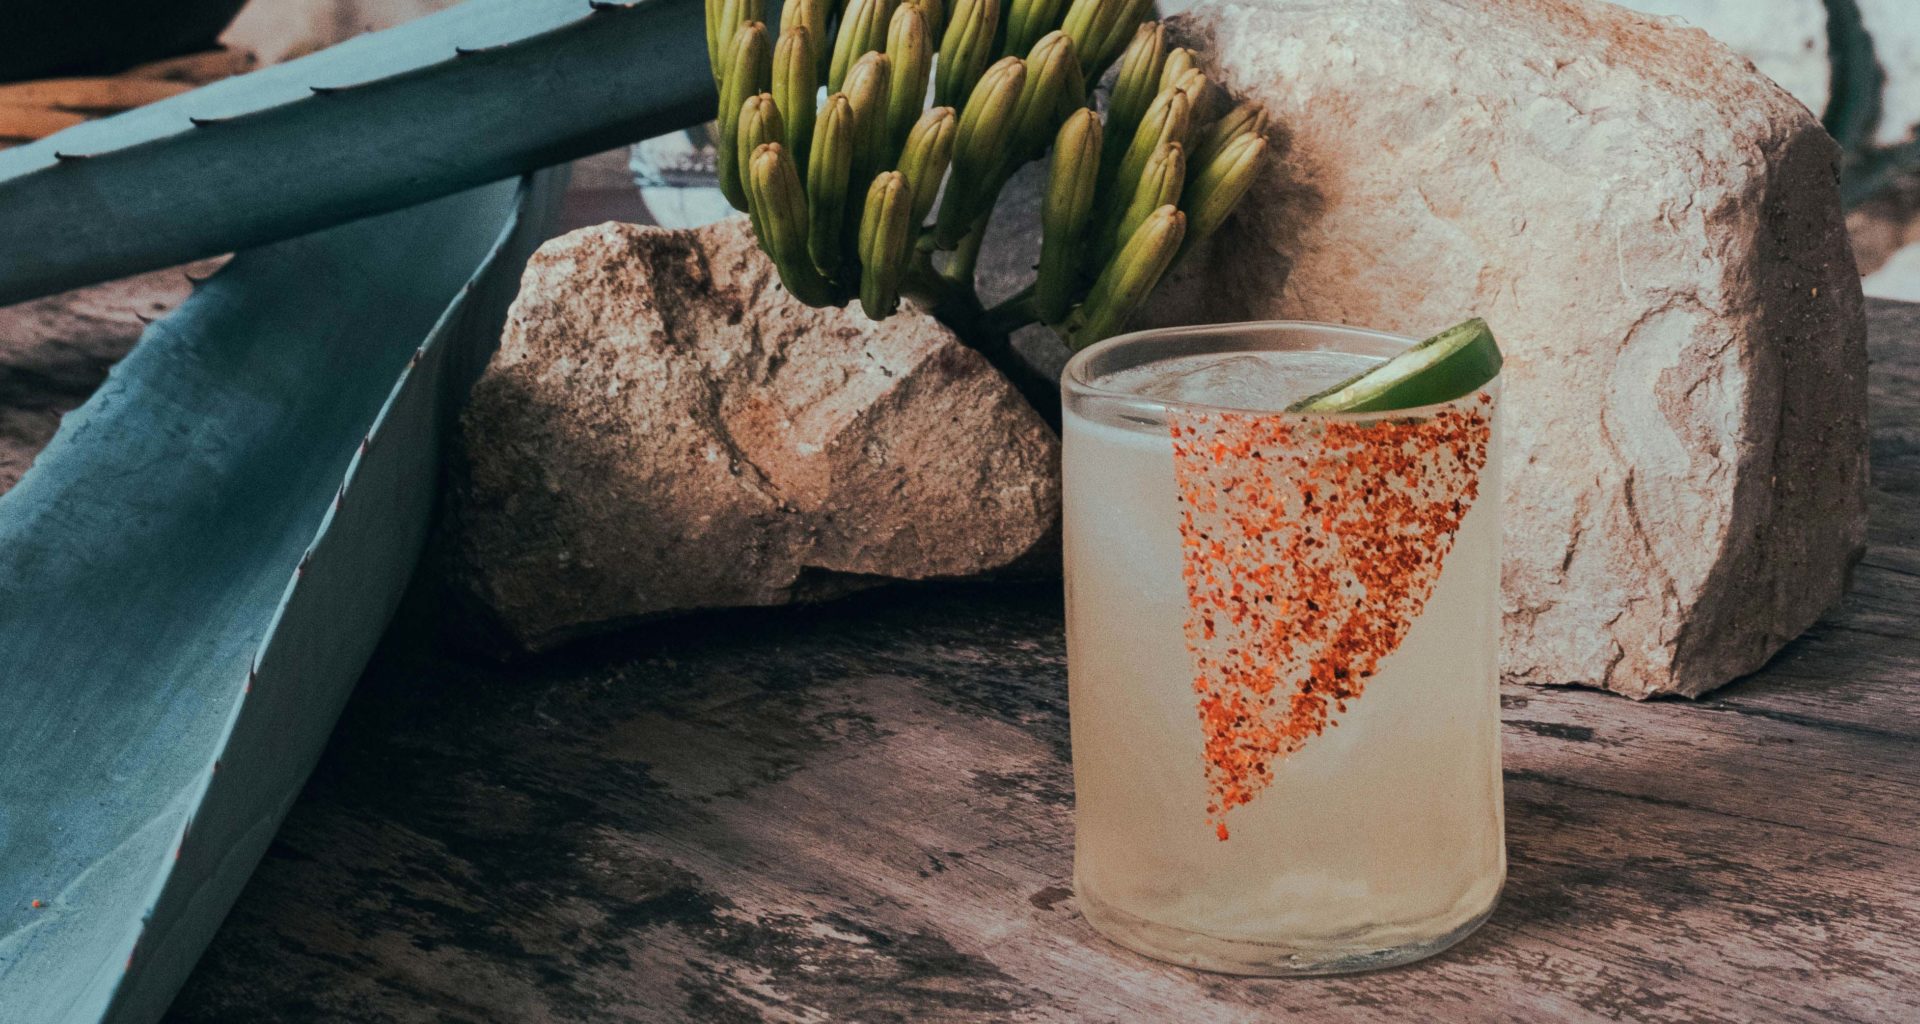 Jalapeño cocktail with a maguey background and stones on a wooden table